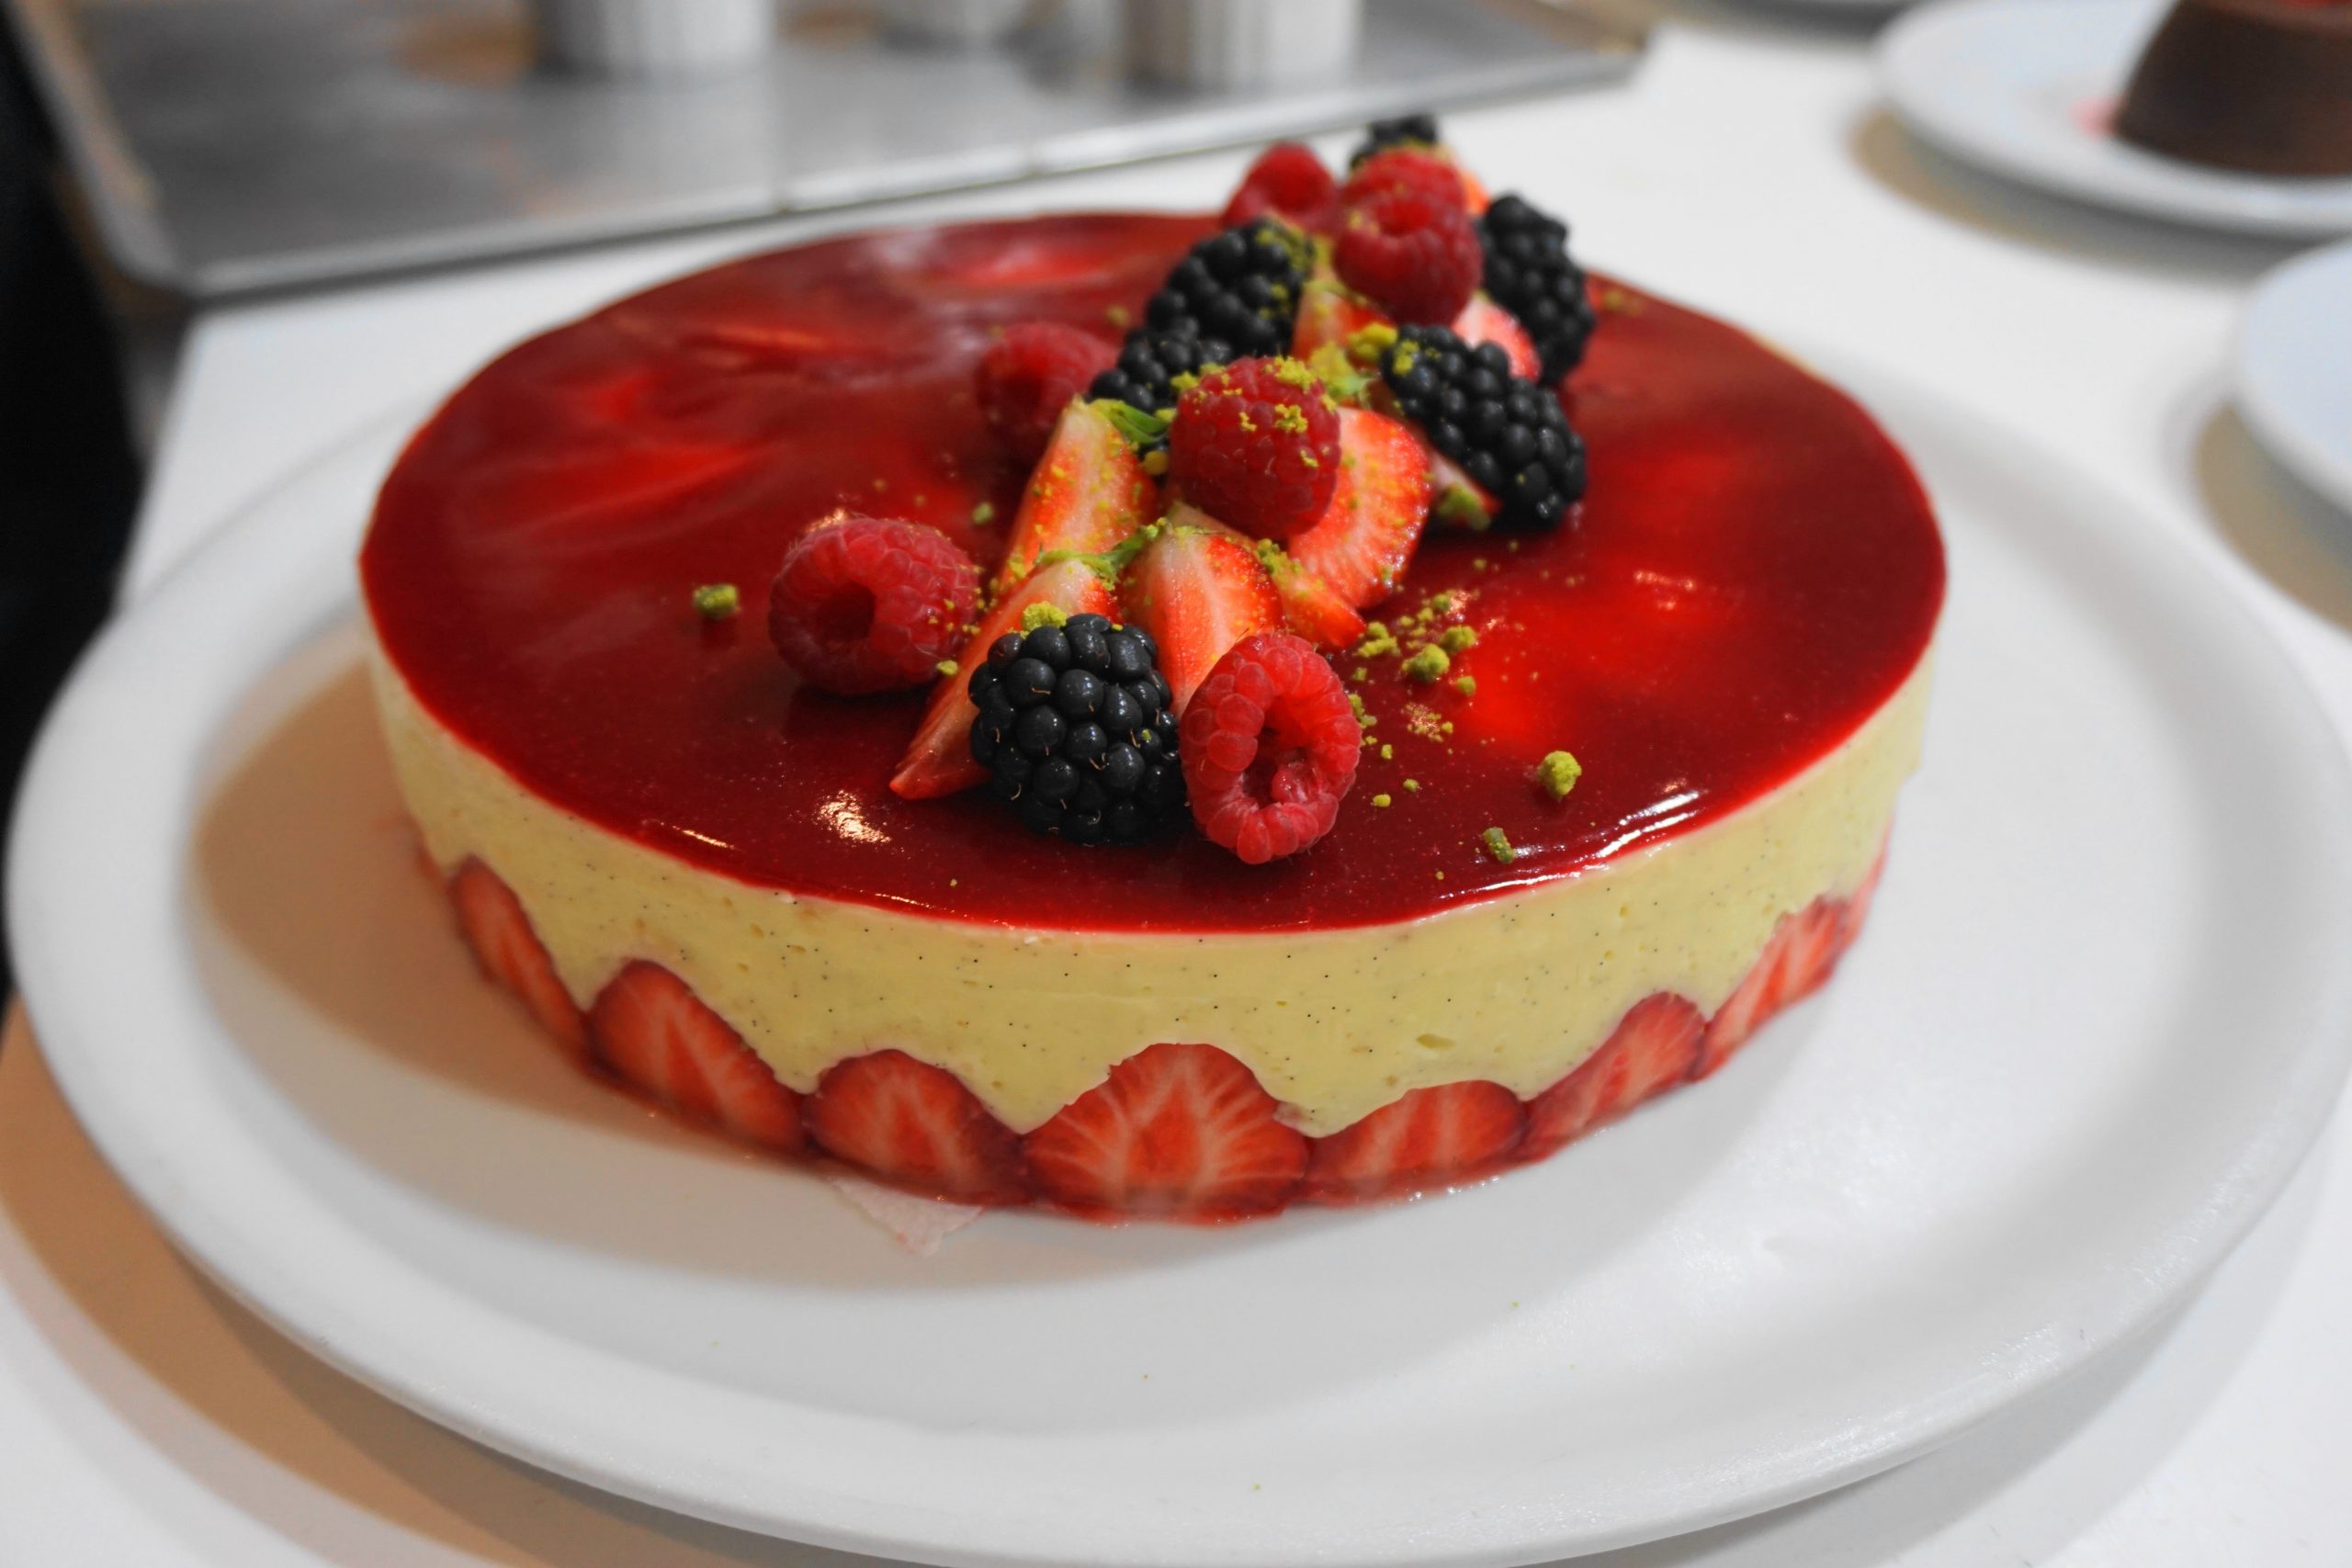 French pastry - strawberry cake